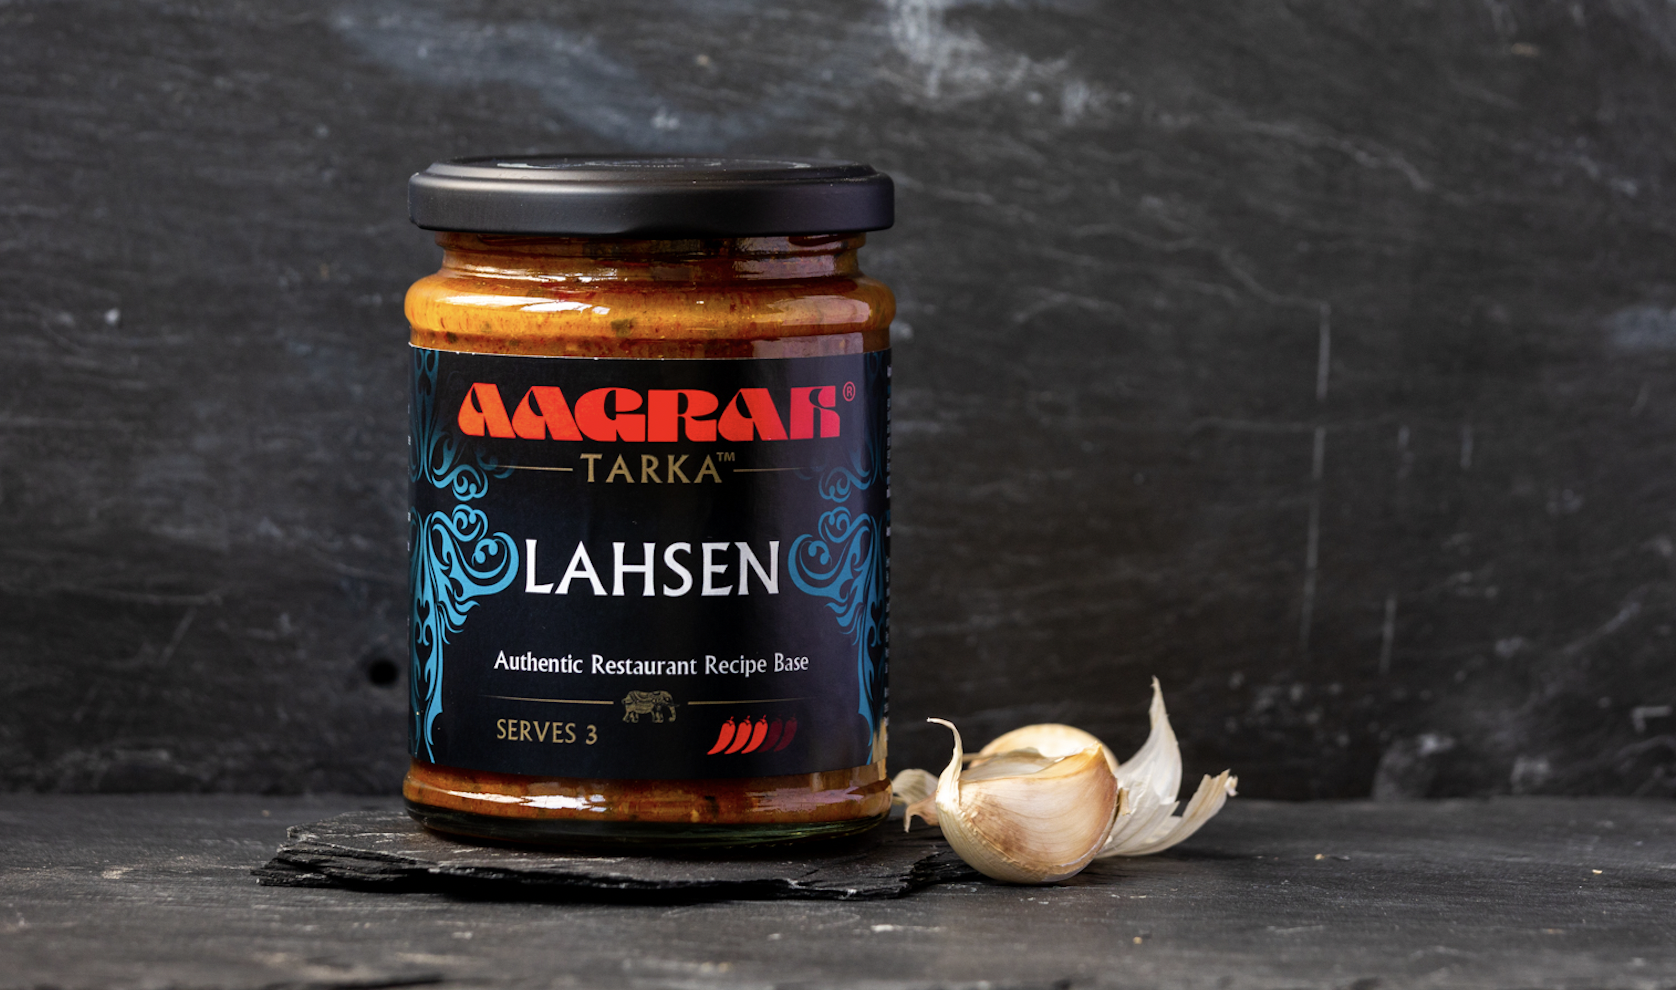 Aagrah Foods’ delicious new LahsenⓇ Tarka Sauce scoops The Grocer Magazine’s 2021 New Product Award